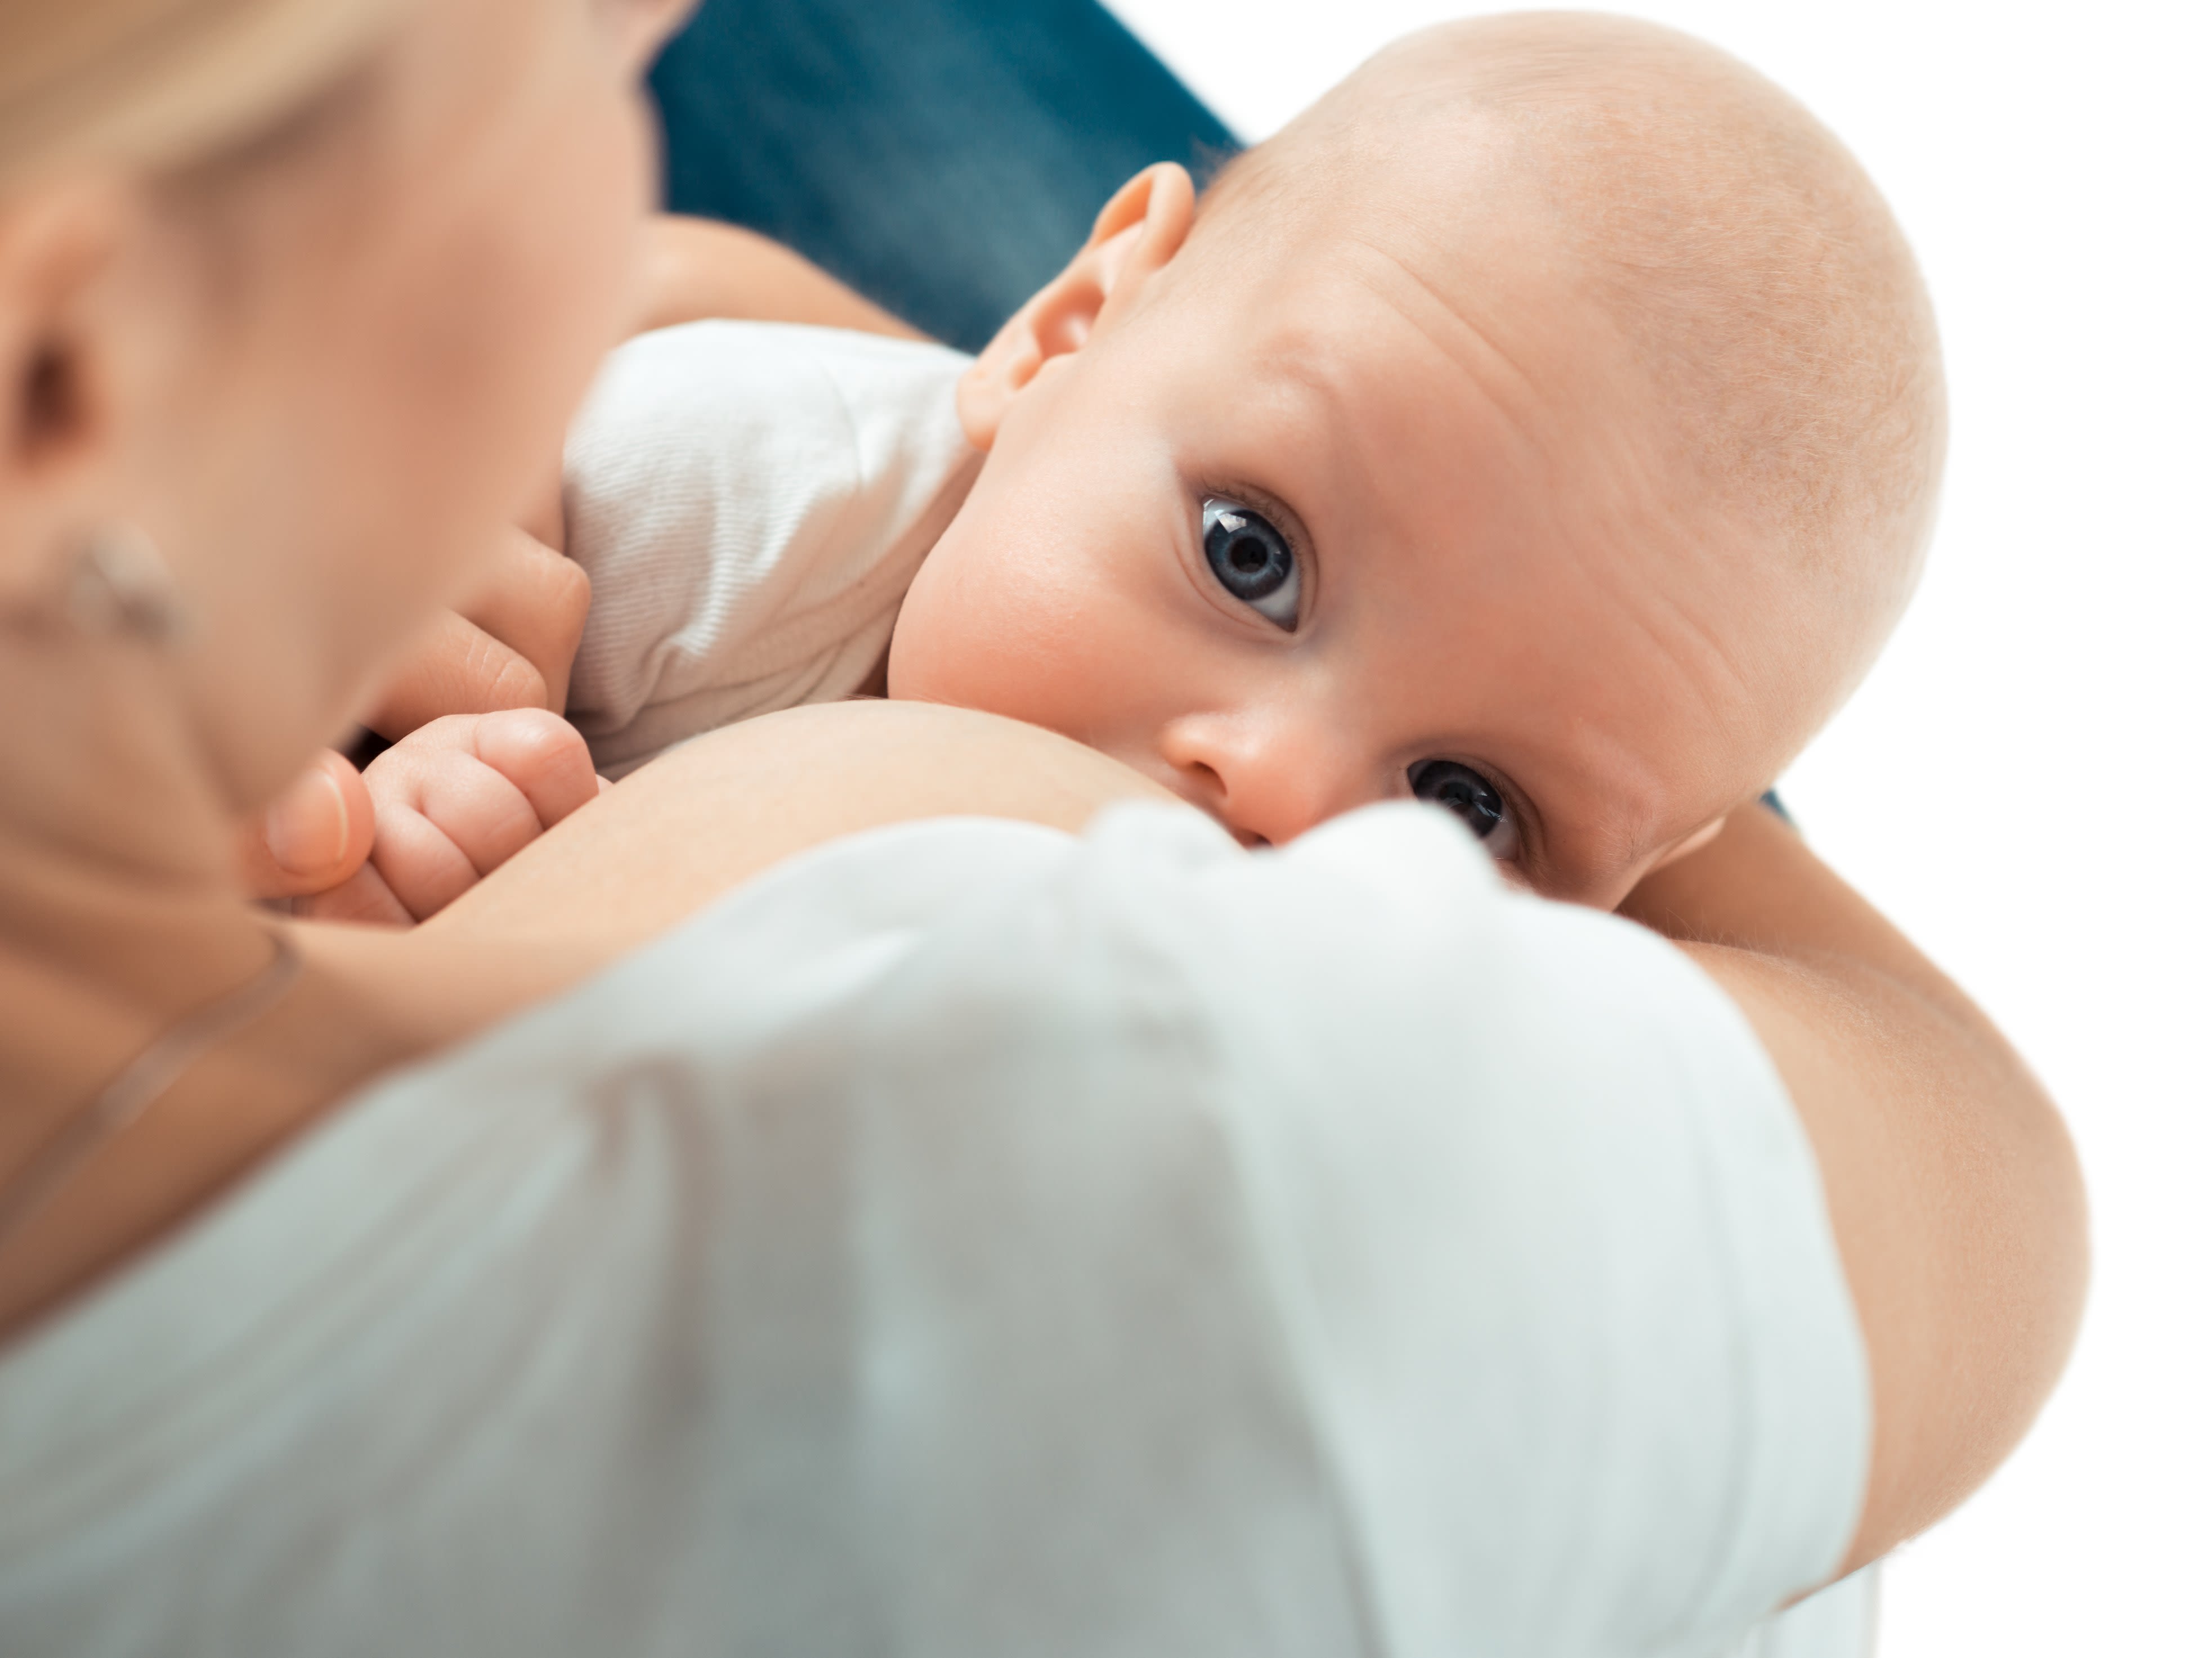 Breastfeeding better for babies' weight gain than pumping, new study says